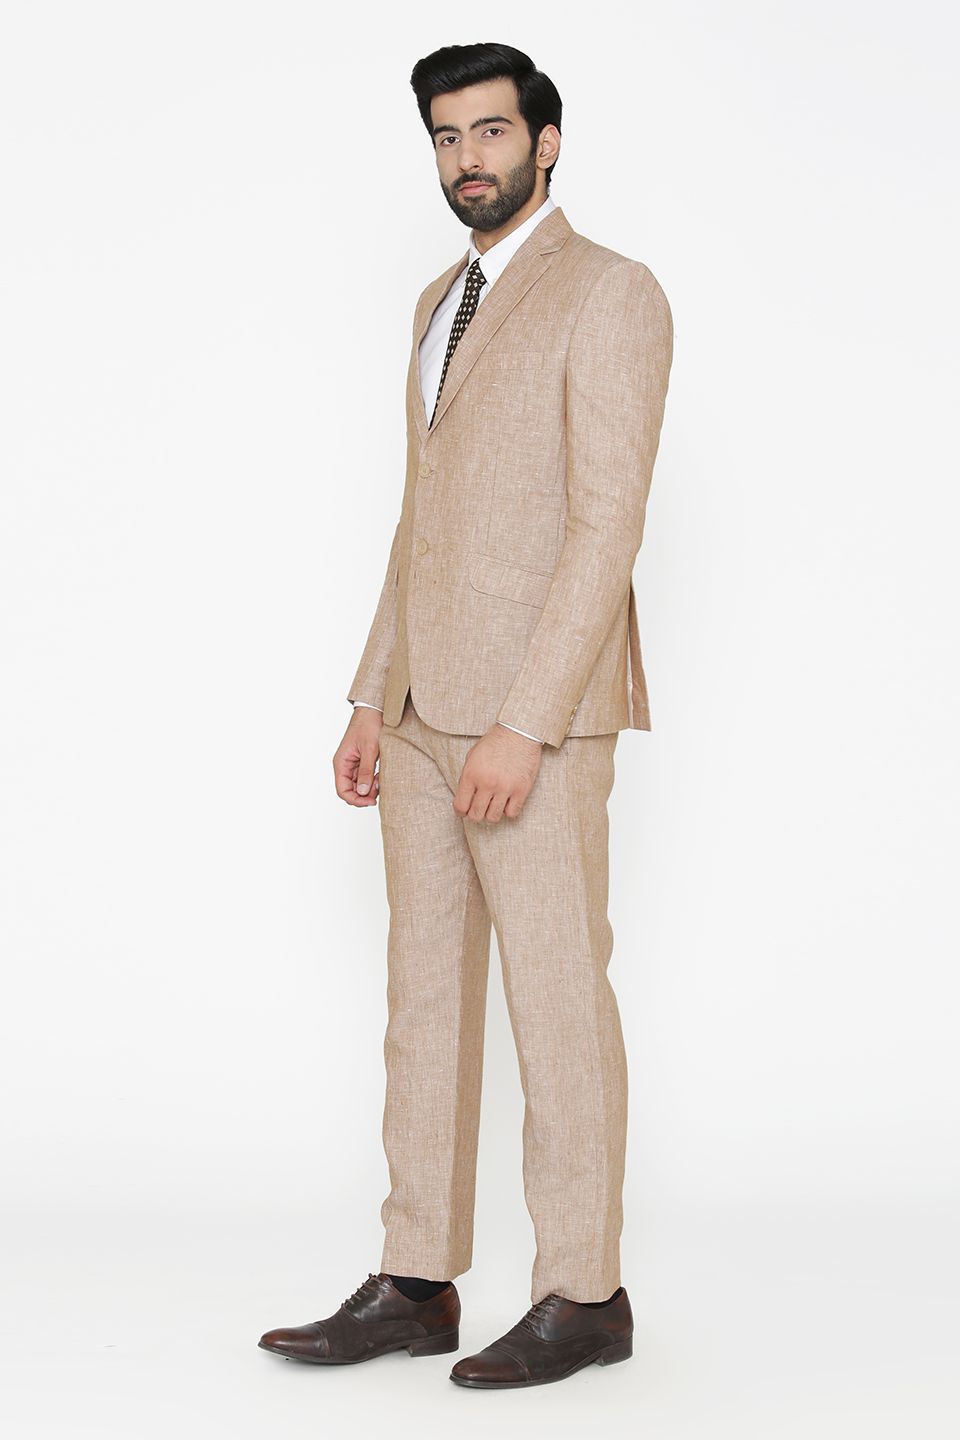 100% Pure Linen by Linen Club  Pink Suit